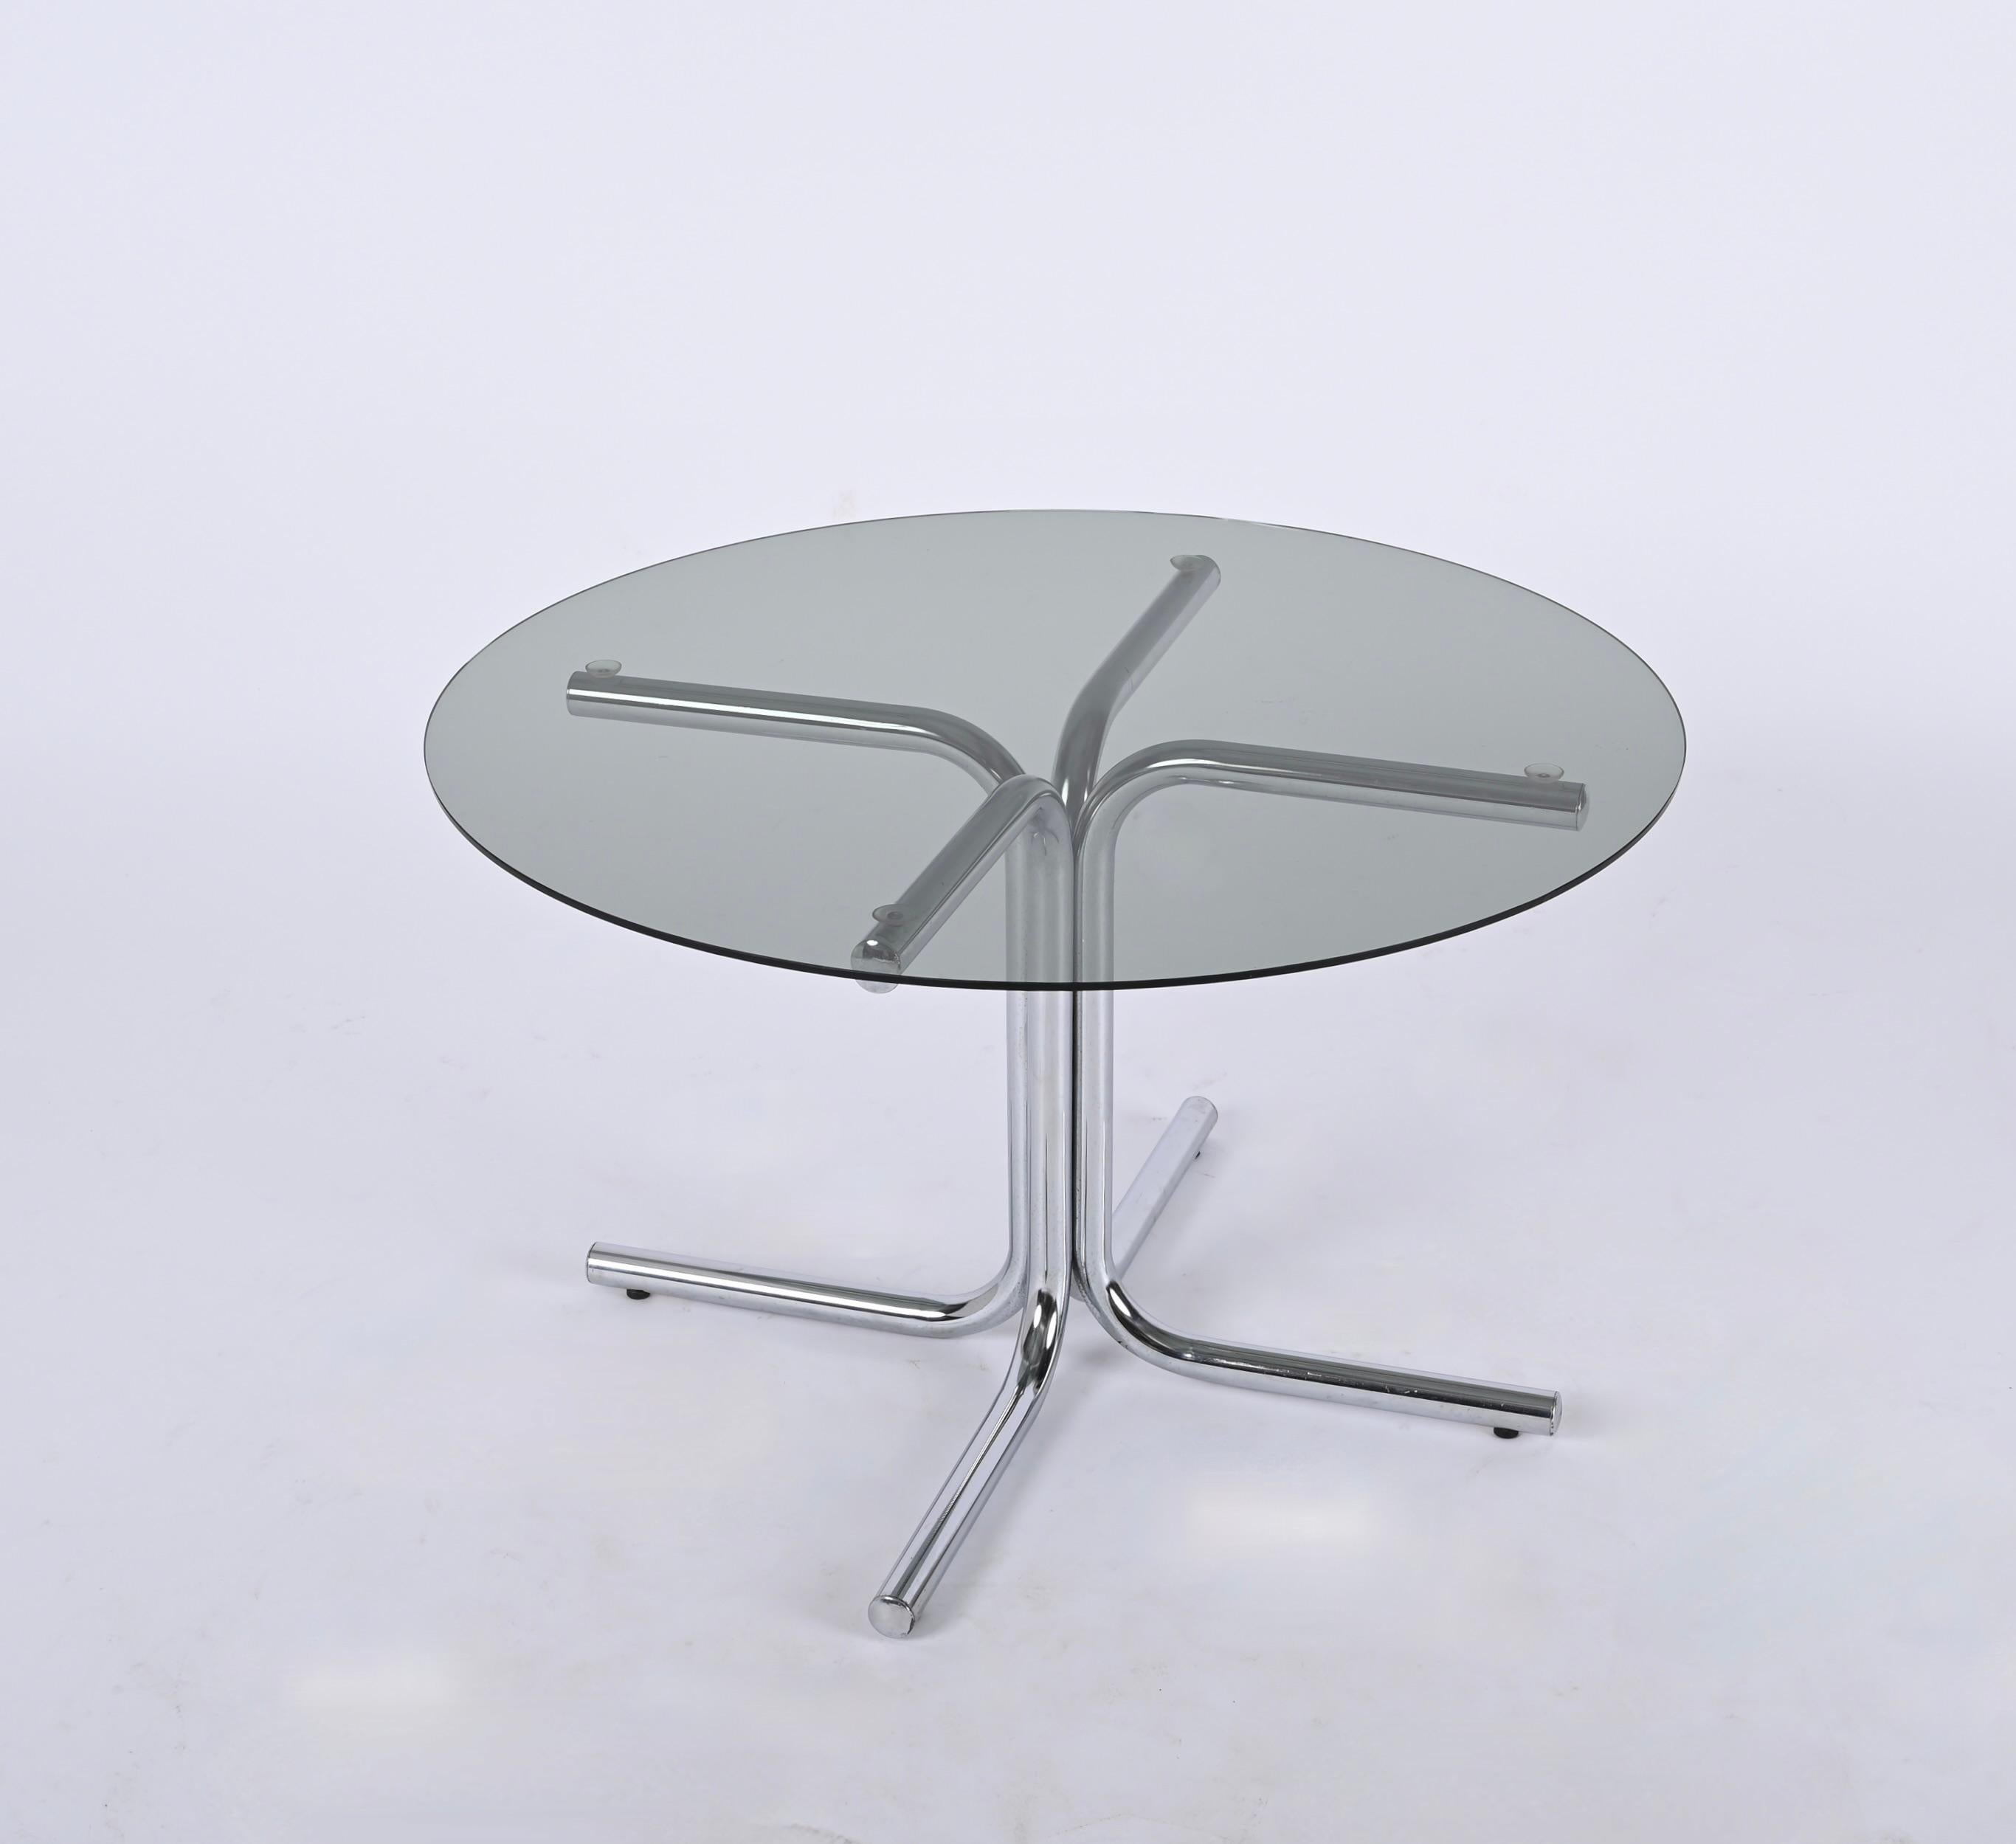 Chrome and Smoked Glass Round Italian Coffee Table, Giotto Stoppino Style, 1970s For Sale 6